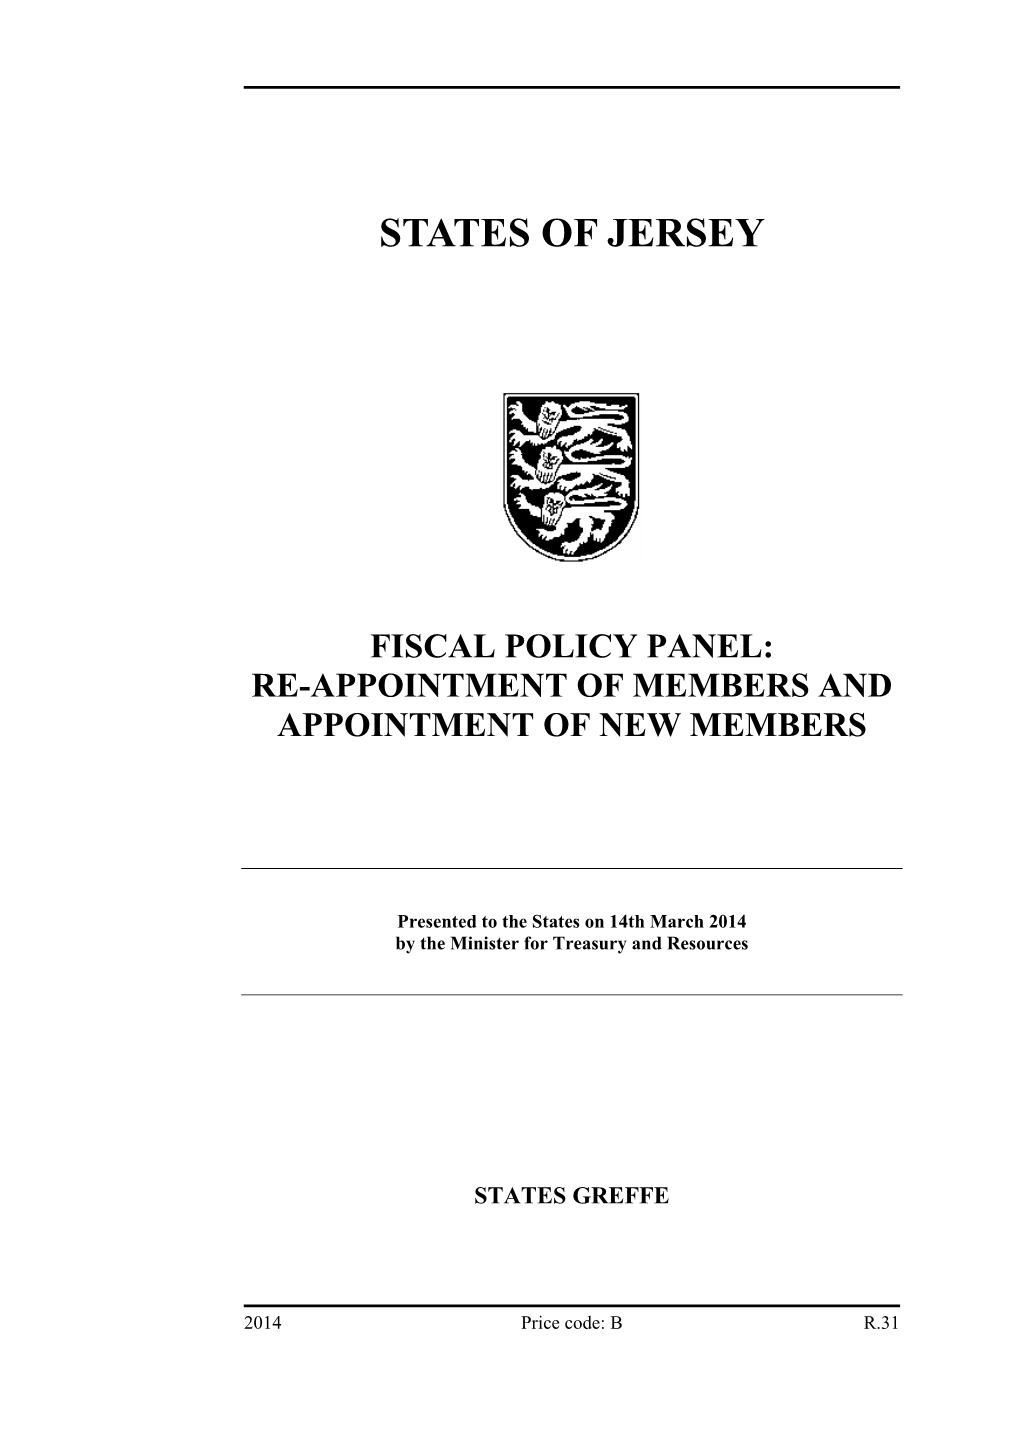 R.031-2014 Fiscal Policy Panel- Re-Appointment of Members and Appointment of New Members